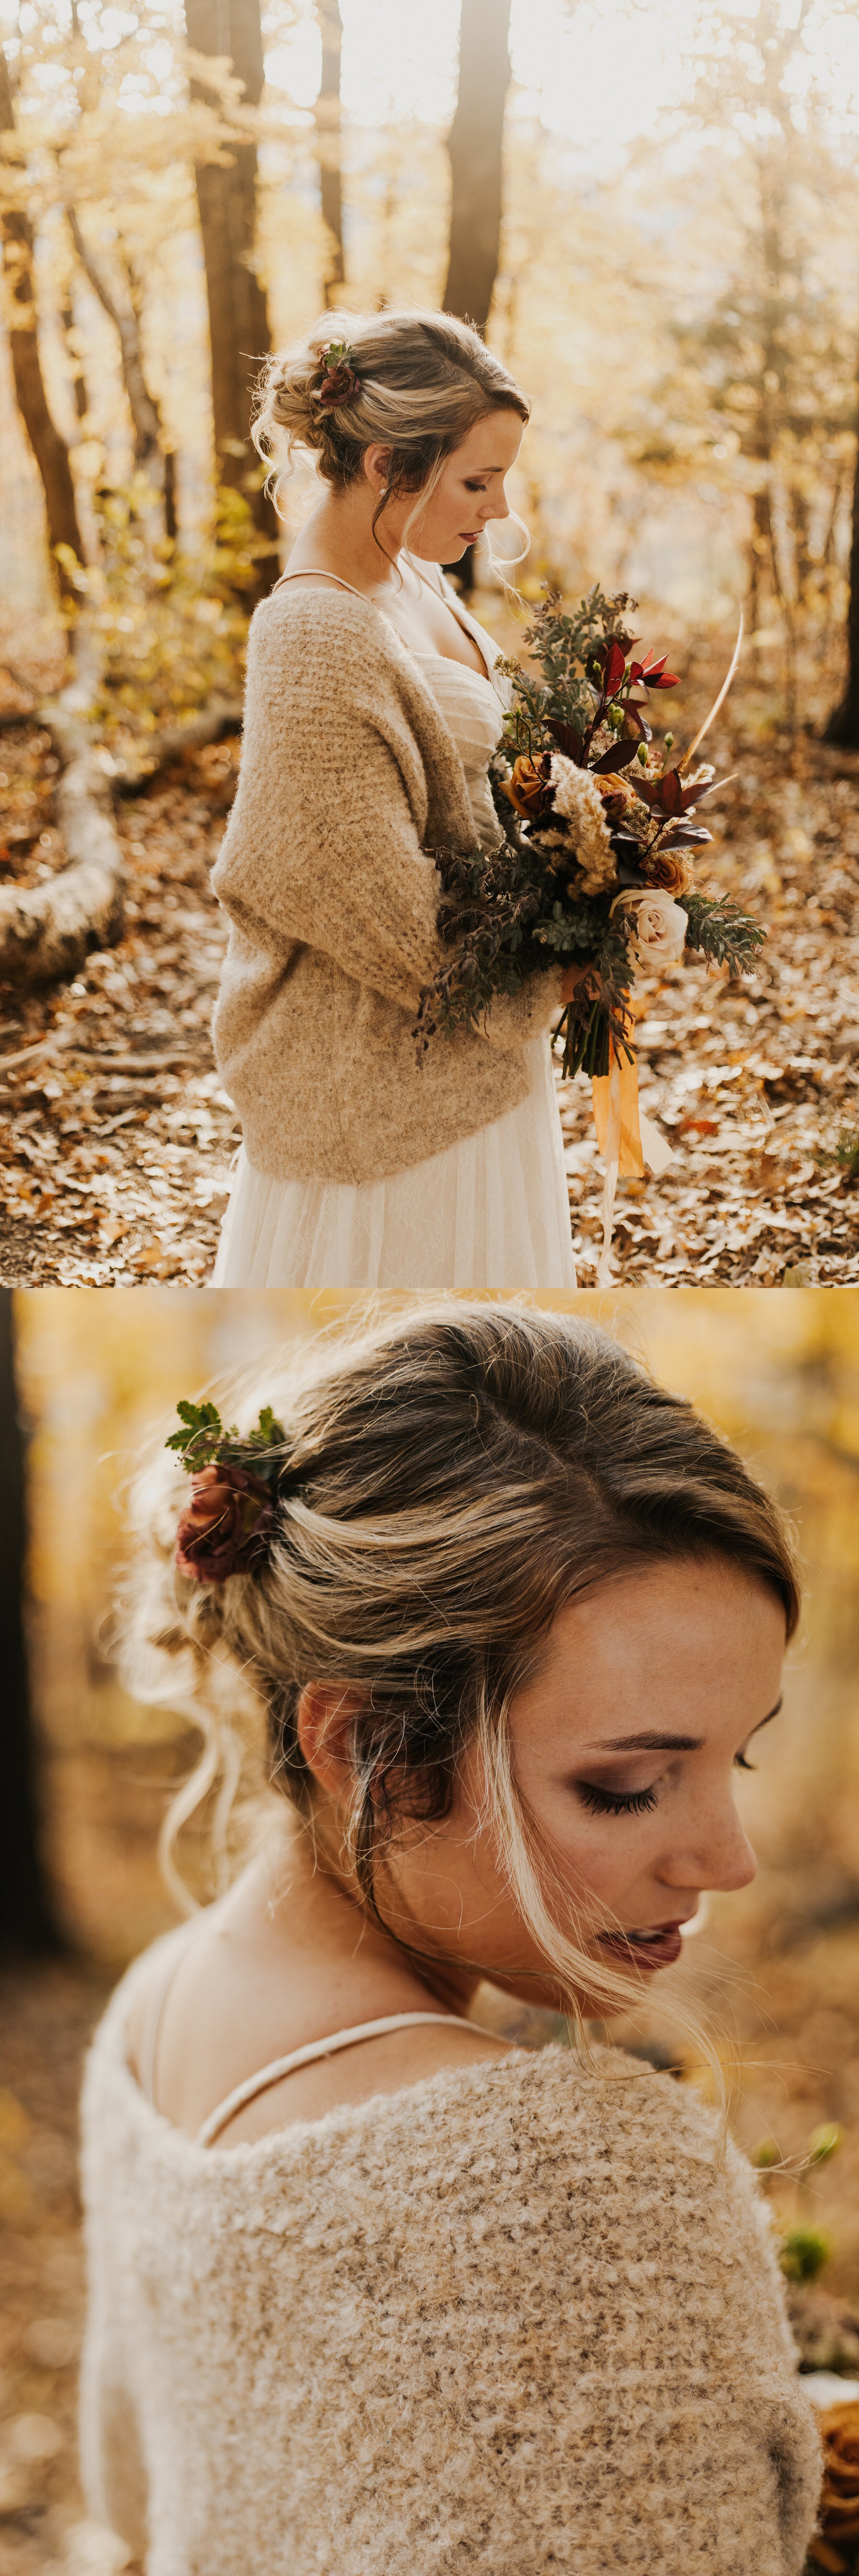 jessika-christine-photography-elopement-couples-outdoor-adventurous-session (16).jpg